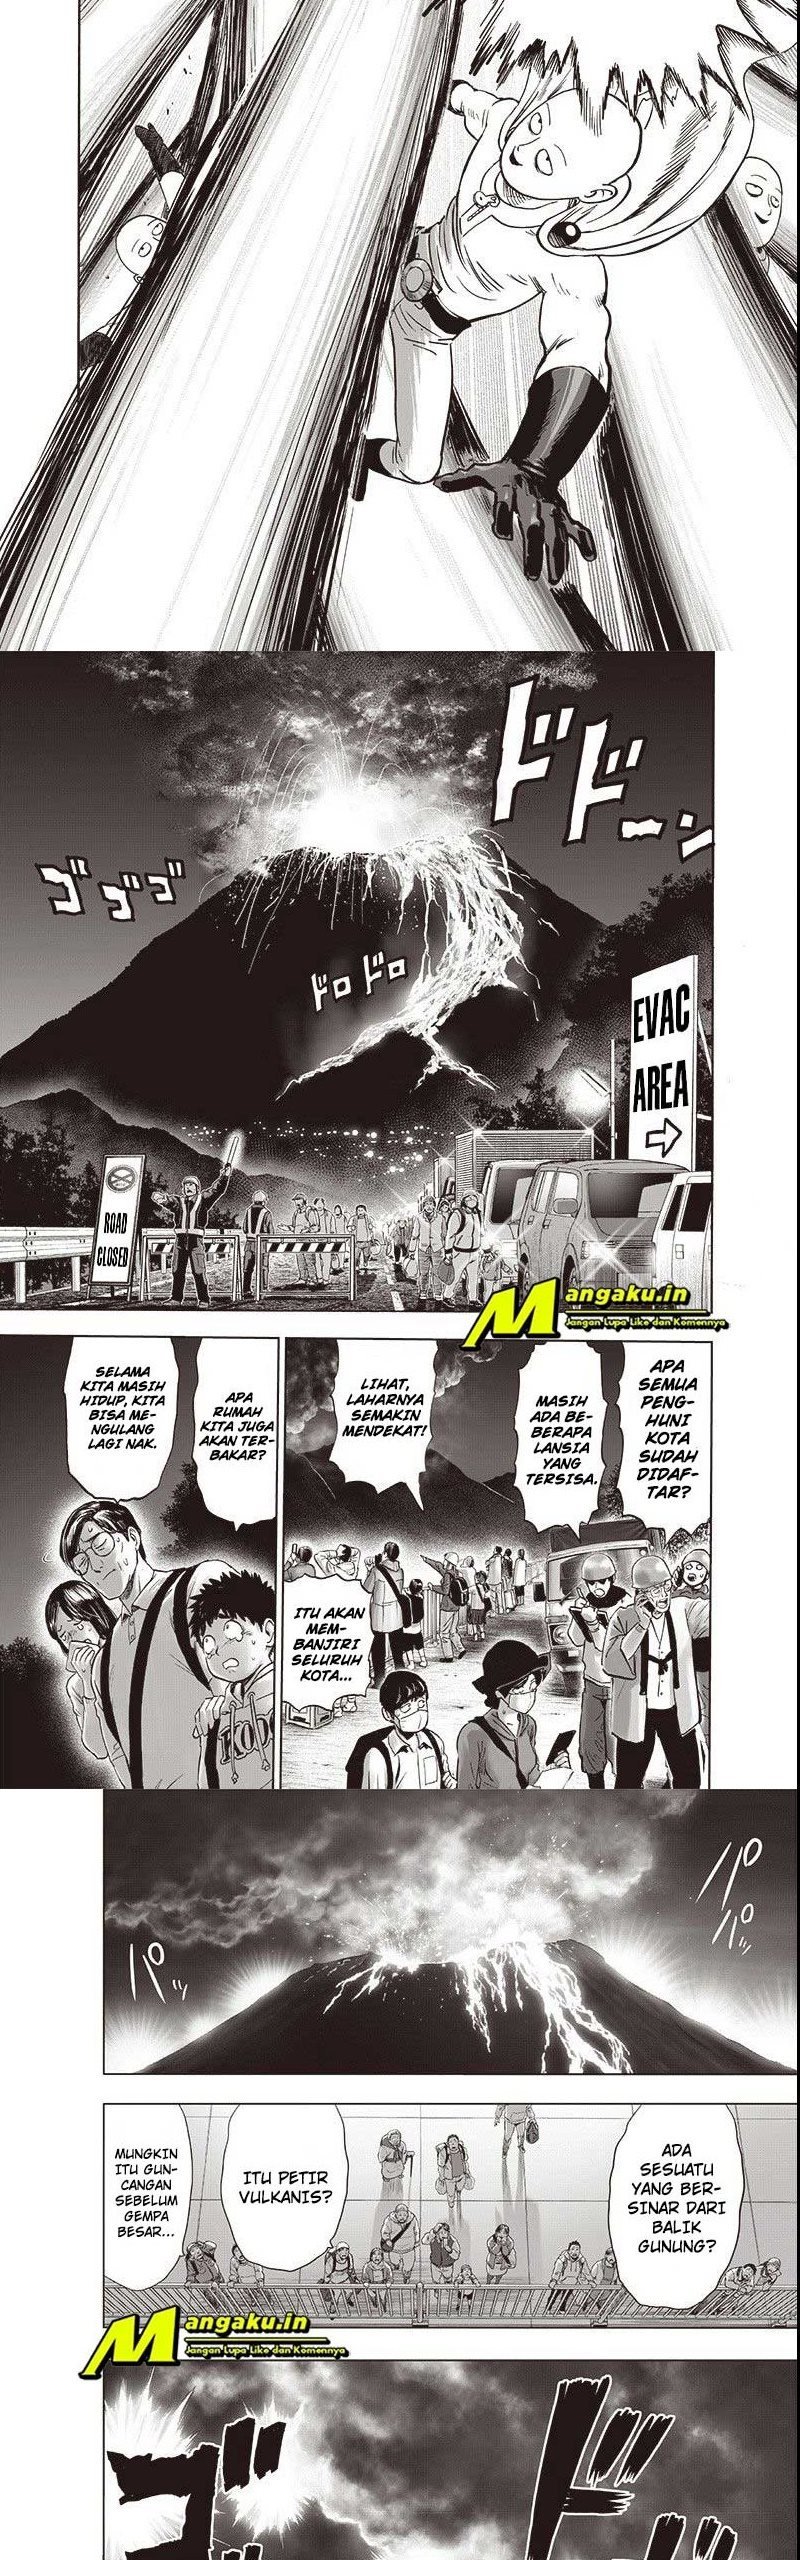 One Punch Man Chapter 213.2